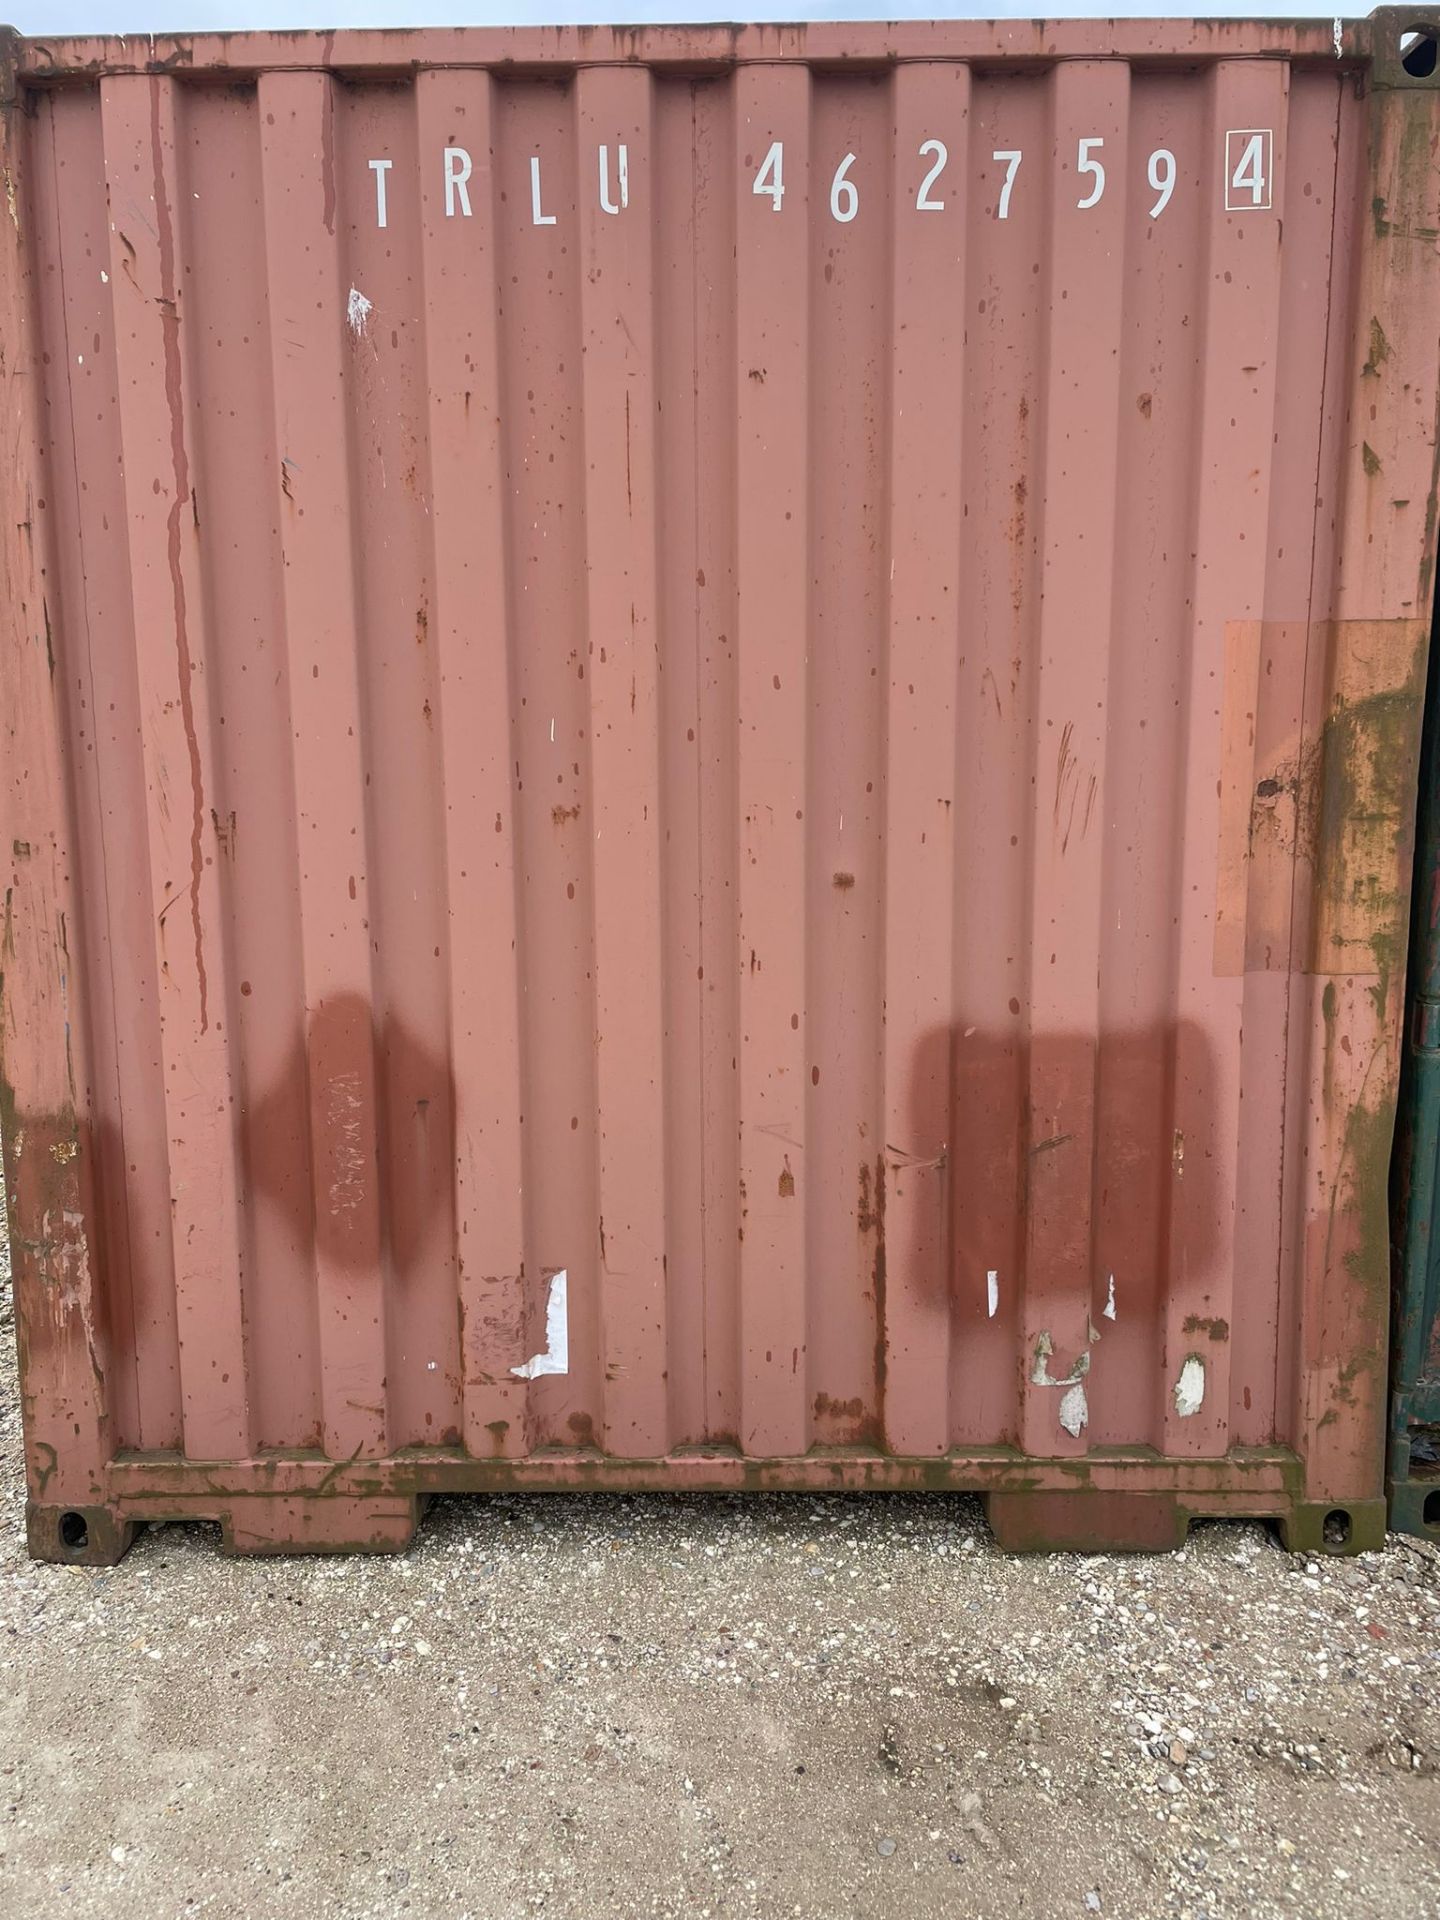 Shipping Container - ref TRLU4627594 - NO RESERVE (40’ GP - Standard) - Image 4 of 4